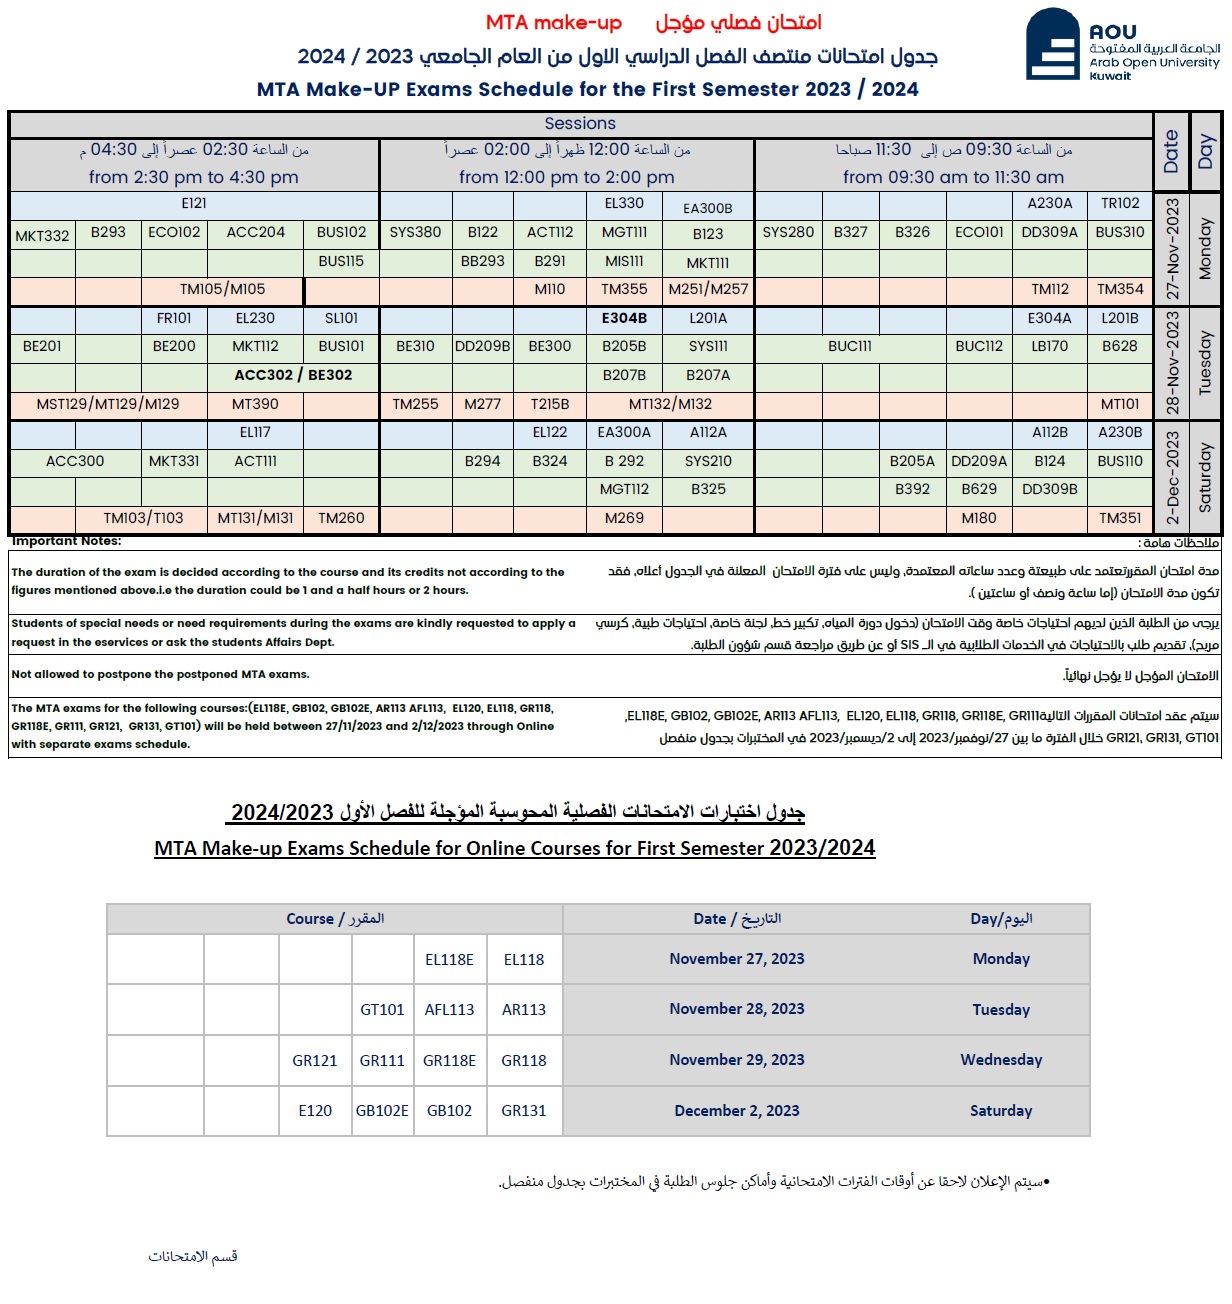 LMSKuwait MTA MakeUP Exams Schedule for the First Semester 2023 /